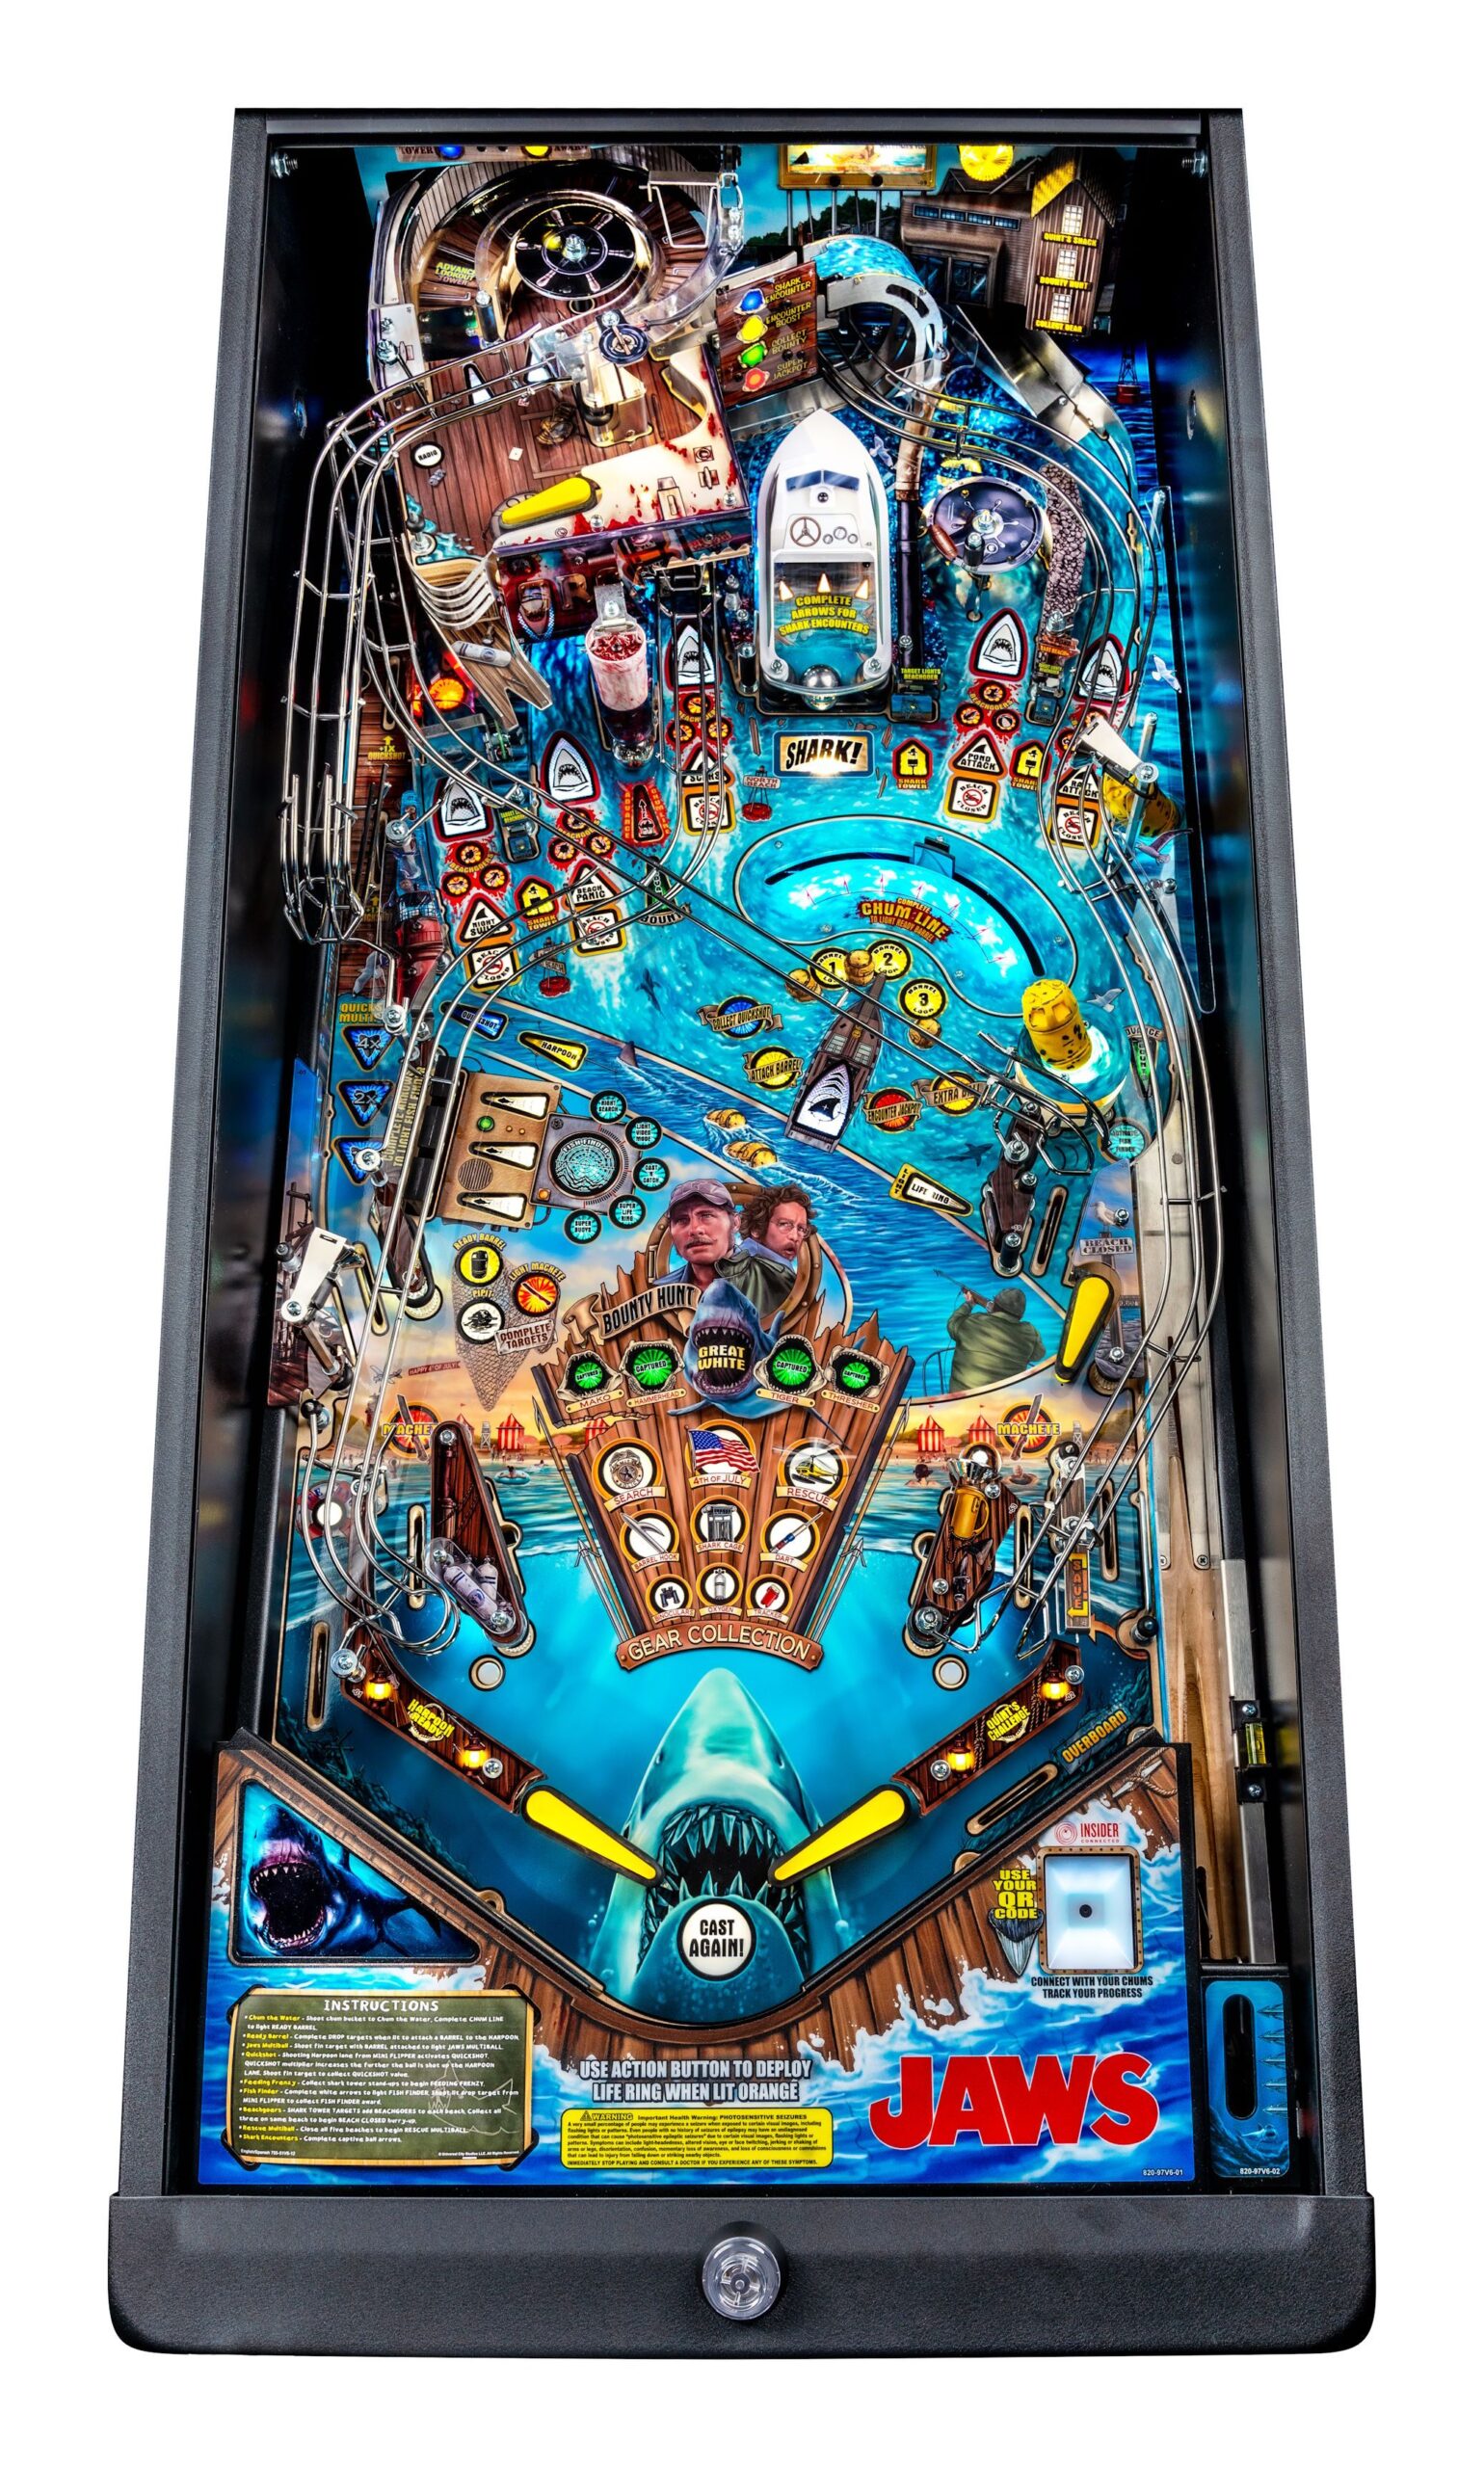 Jaws Receives Official Pinball Game Nearly Fifty Years After Its Release